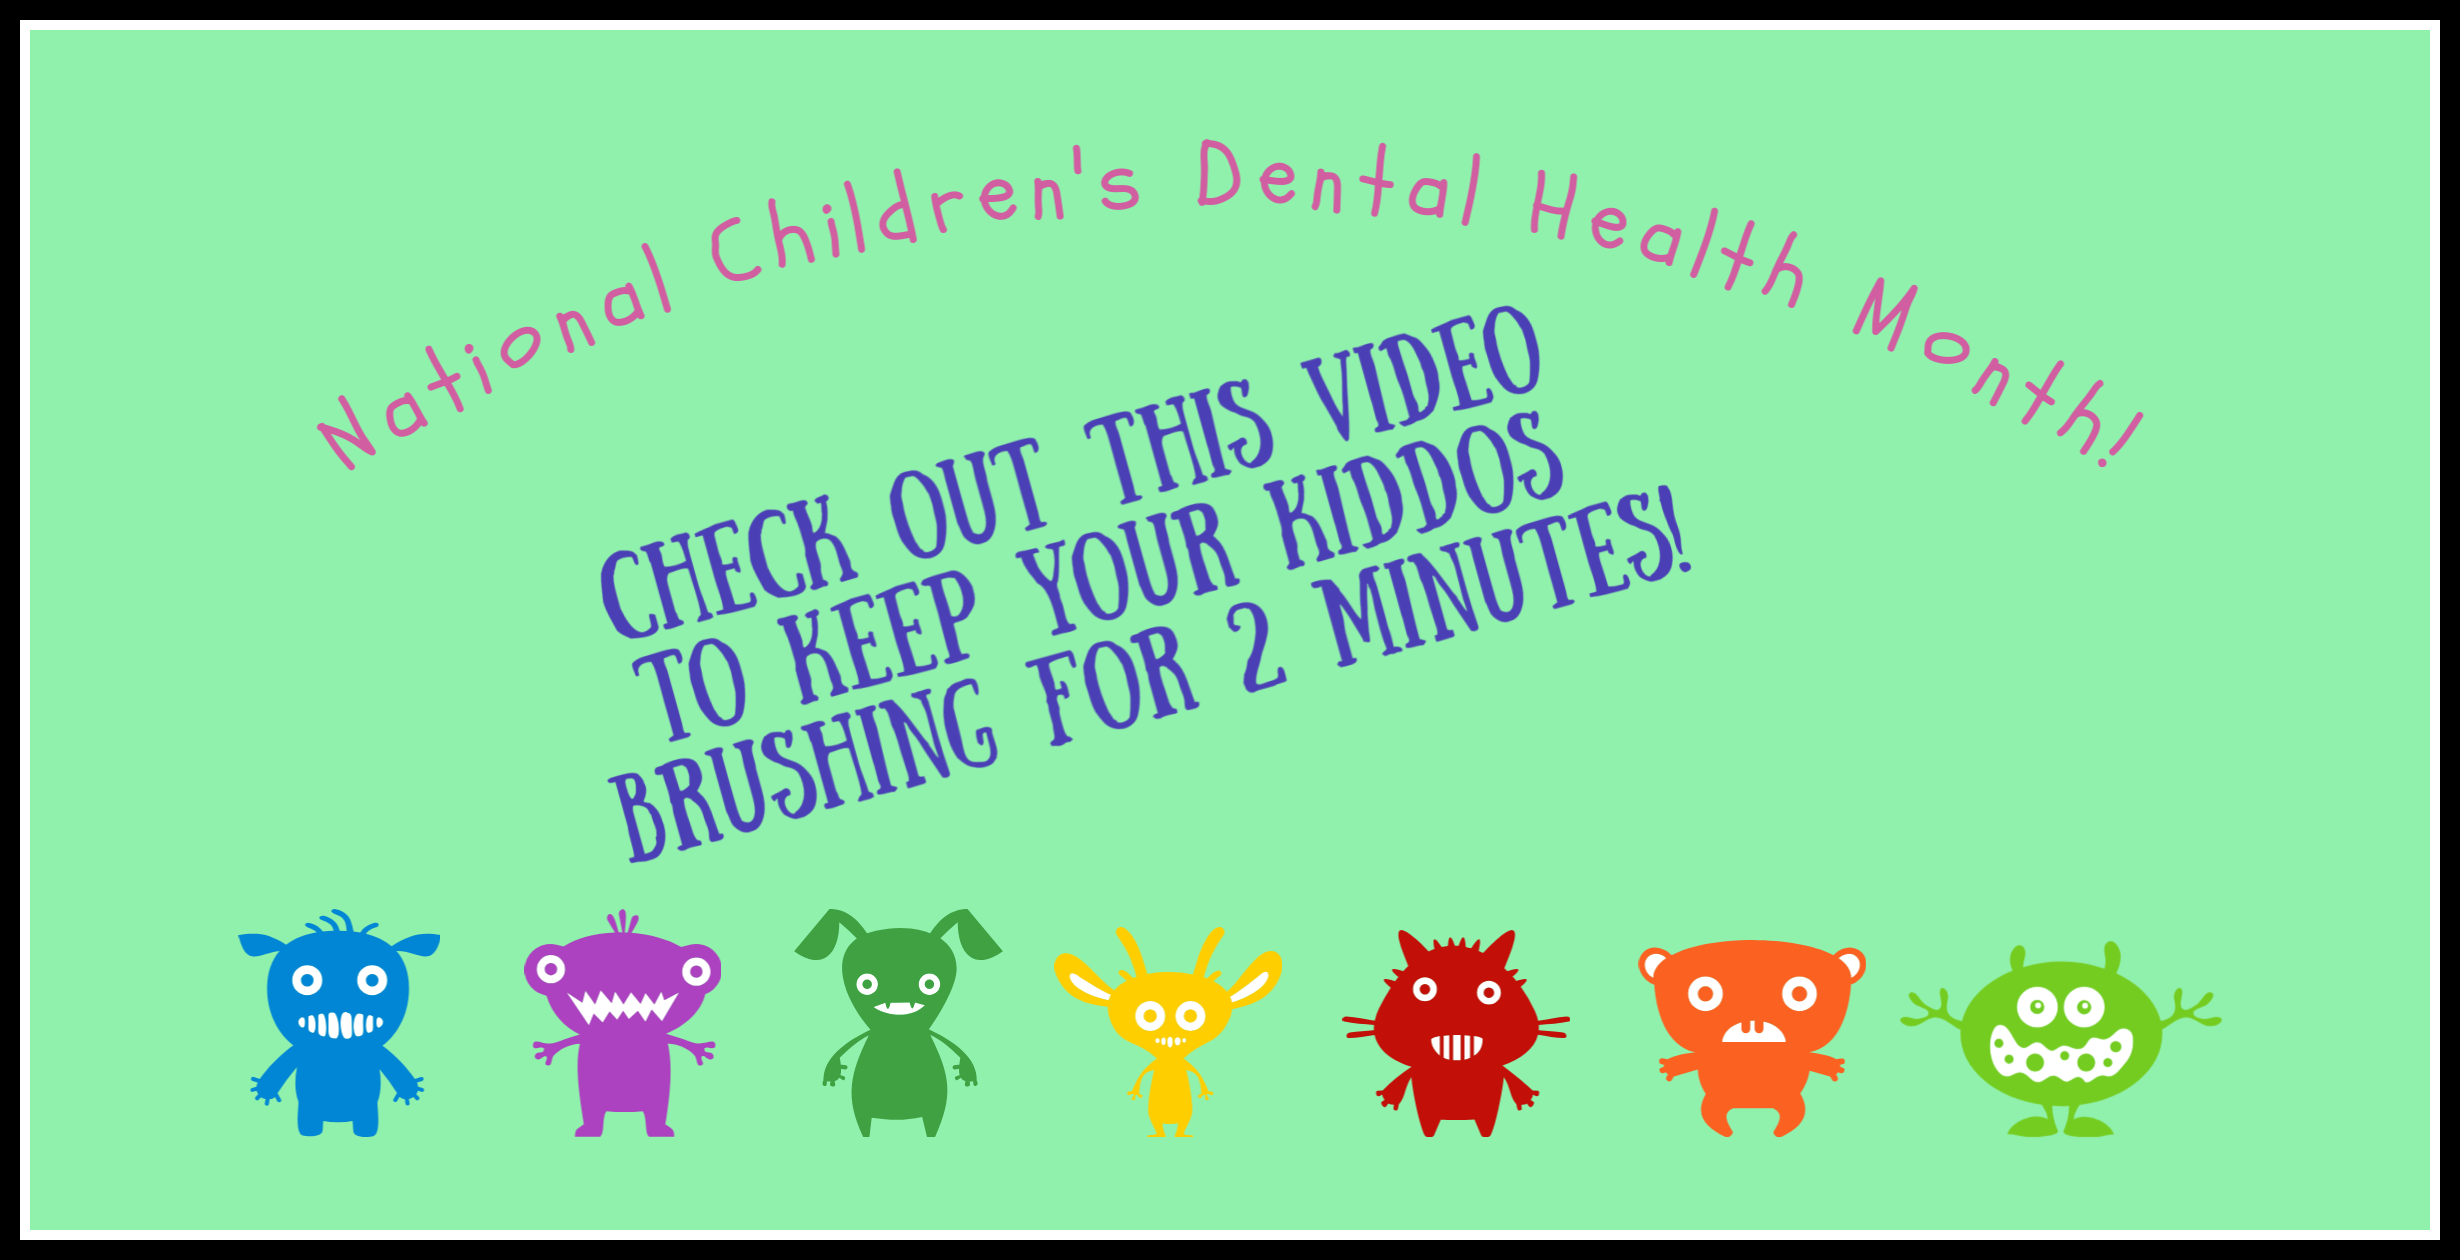 Keep kiddos motivated to brush for 2 minutes! Watch this video!